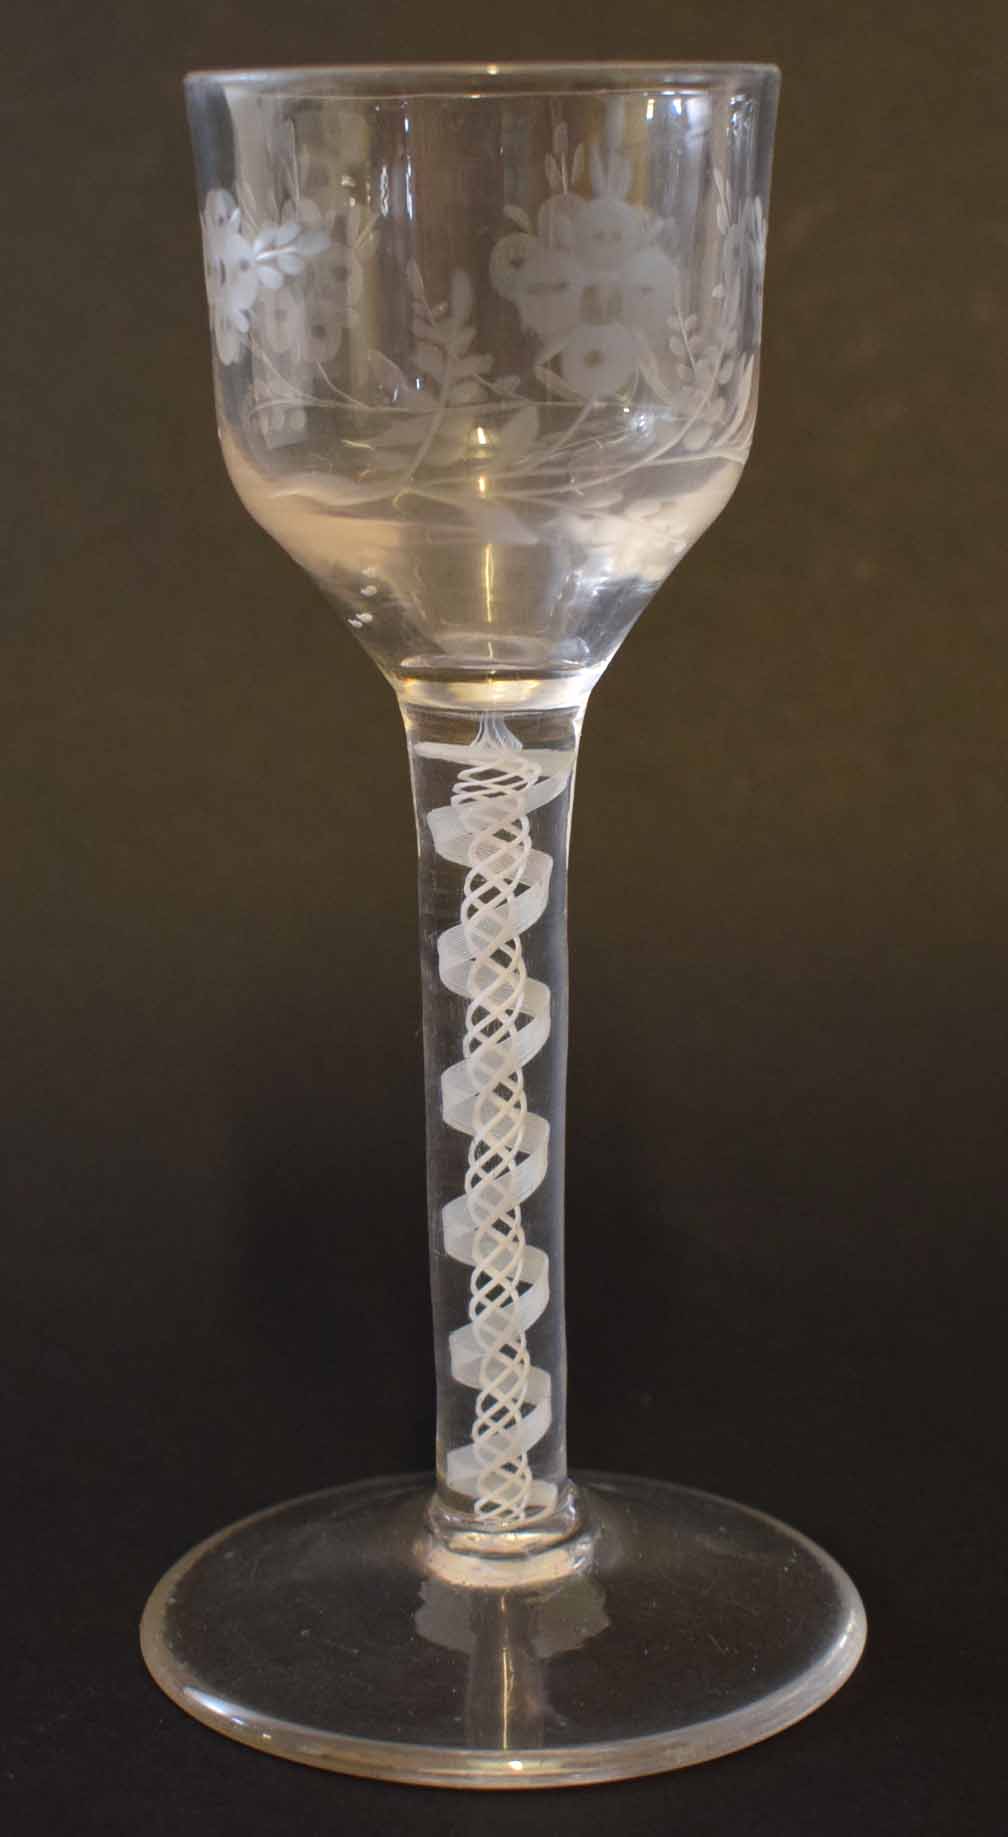 Mid-18th century wine glass with air twist stem and the bowl with an engraved design, 14cm high